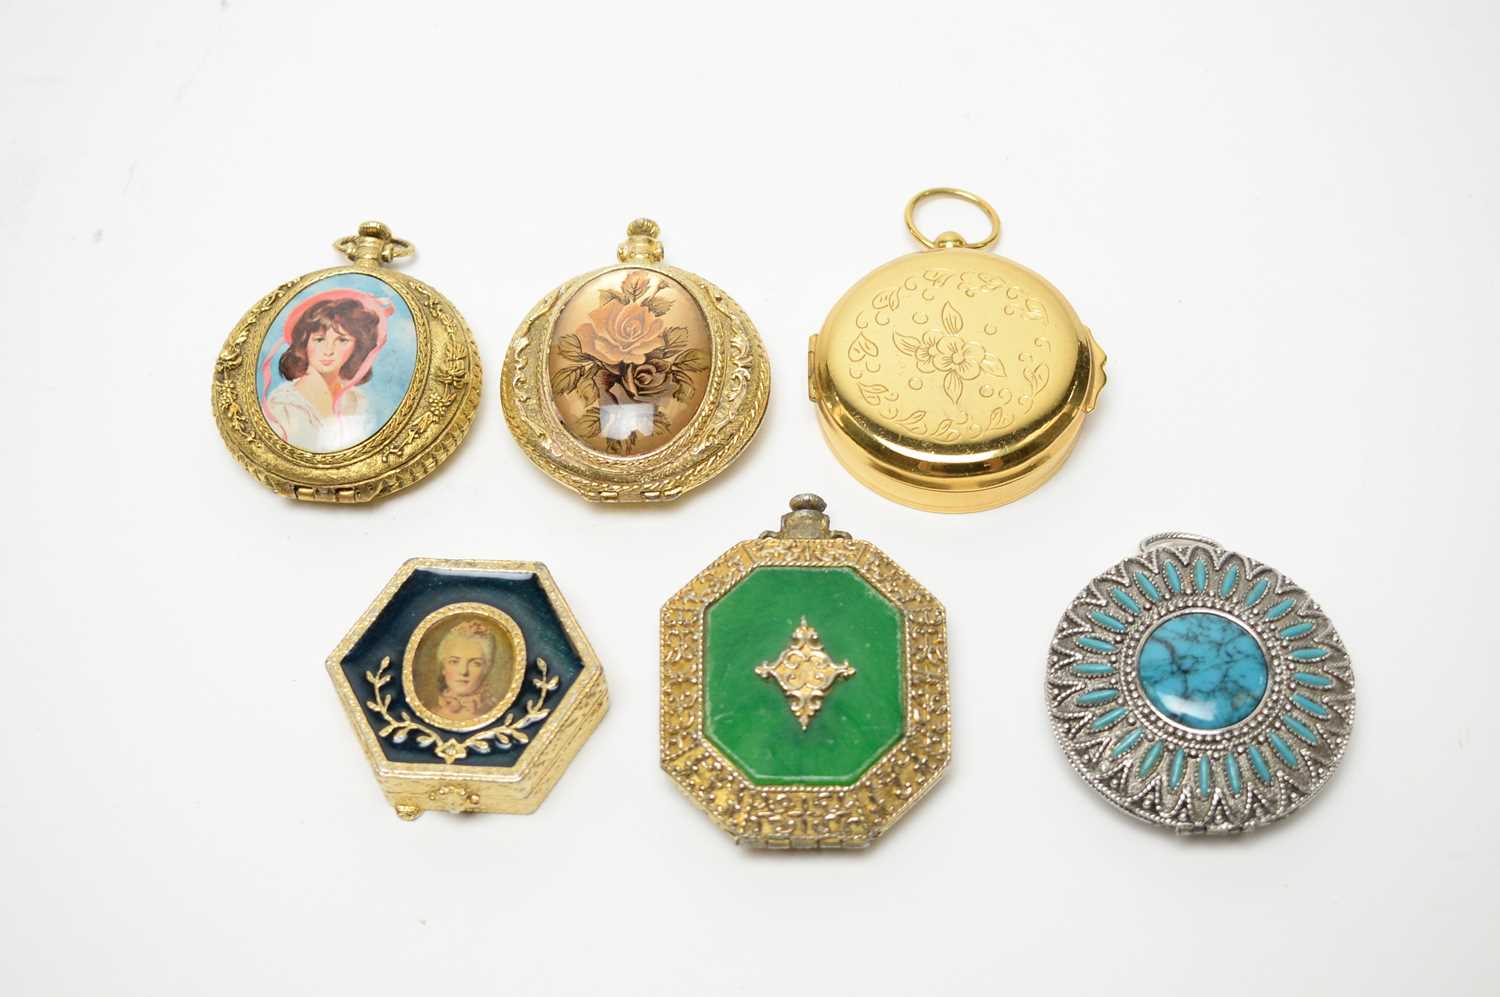 1950s pressed powder compacts in the style of pocket watches